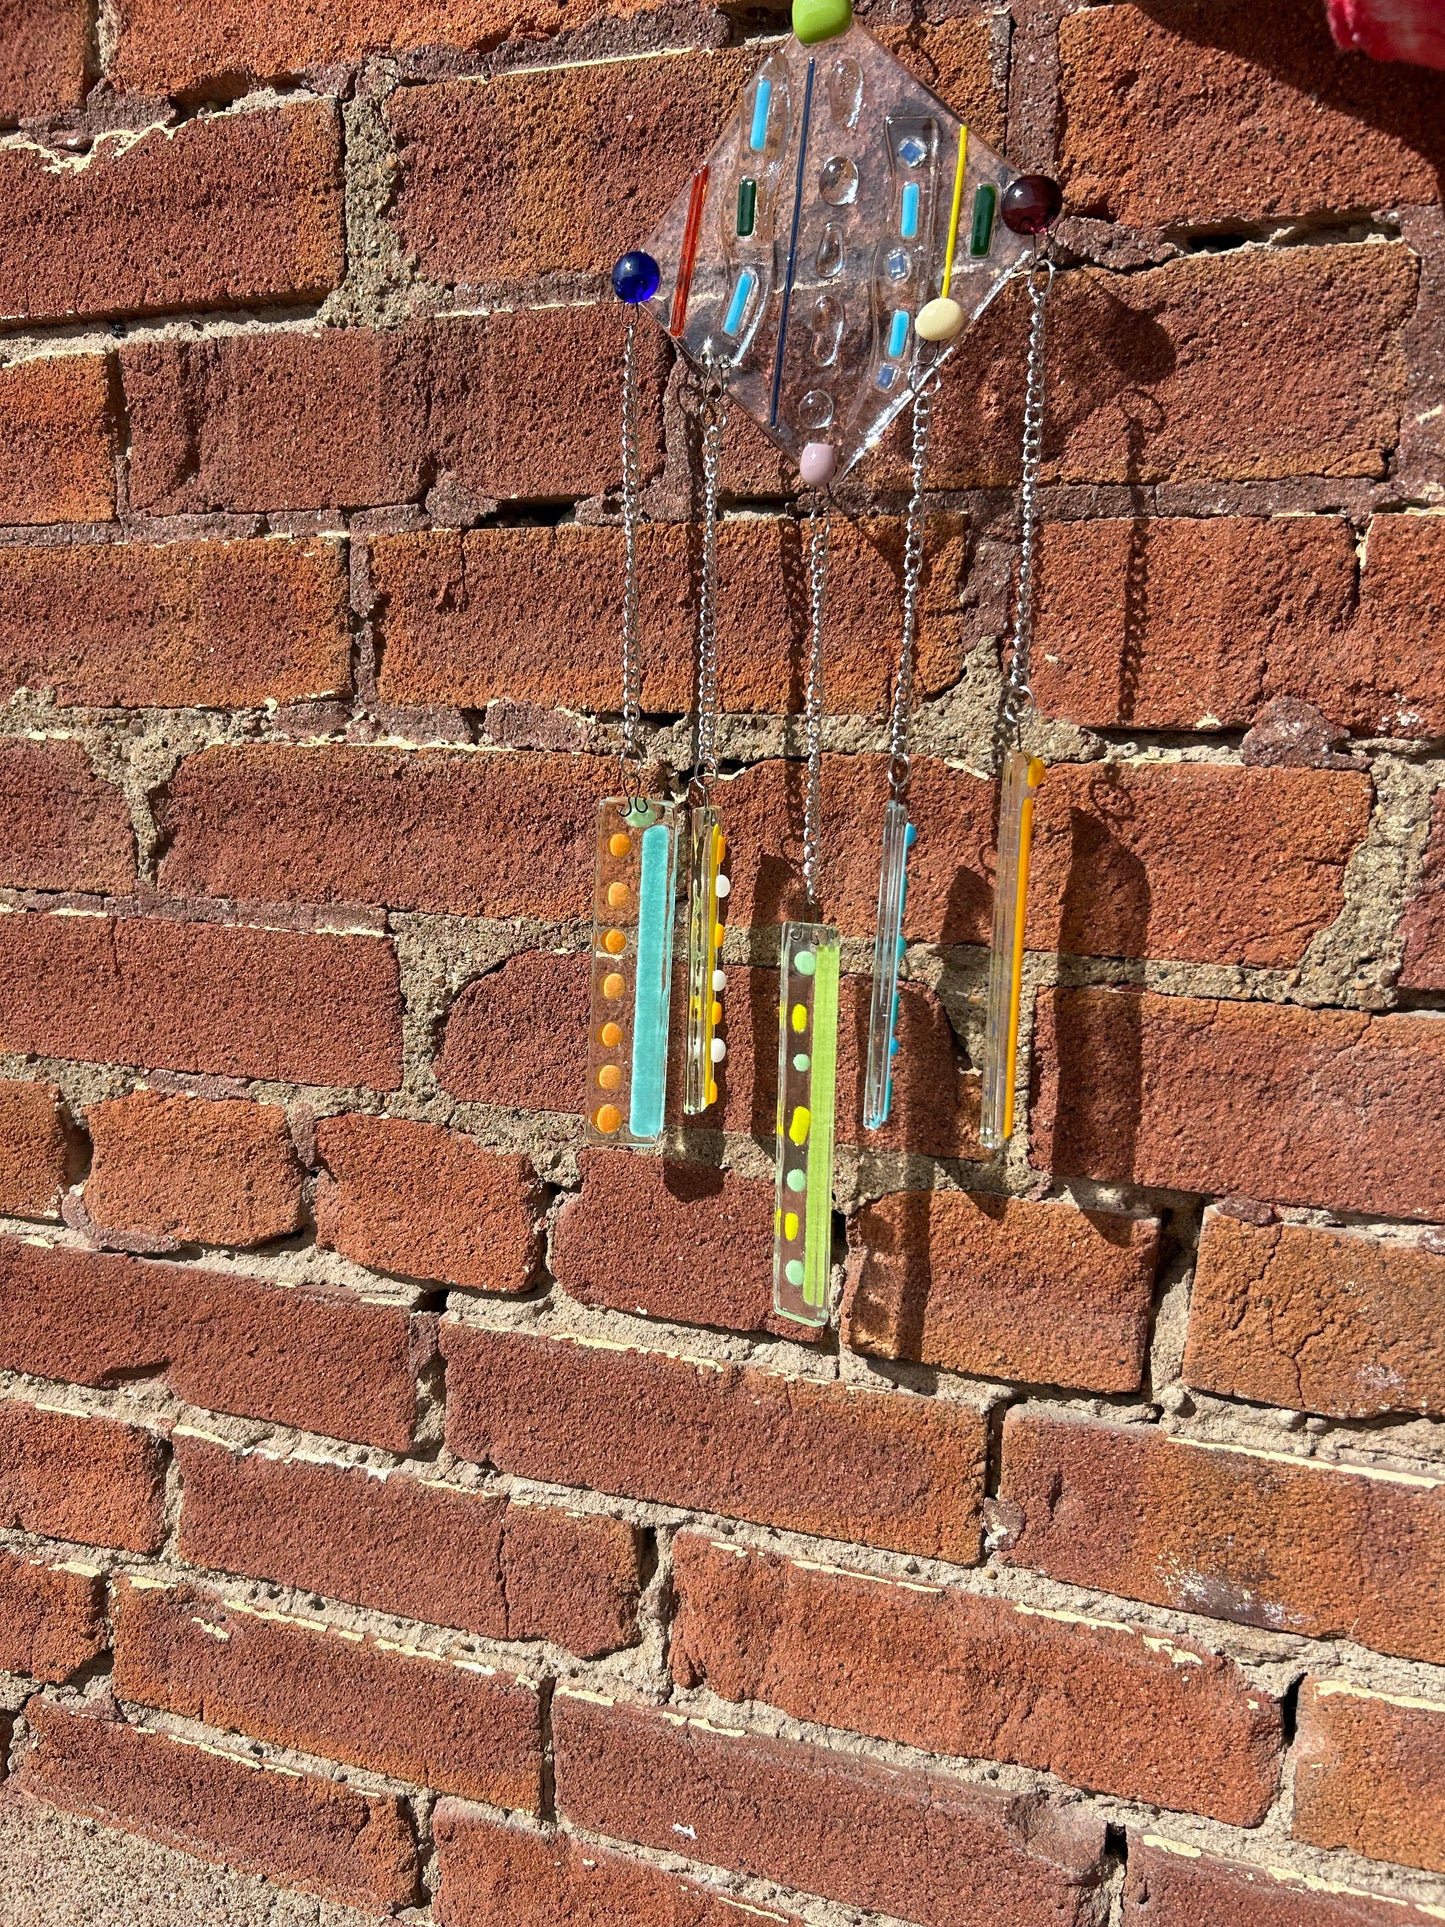 6" plate or sun catcher Fused glass, March 8 4:00-6:00